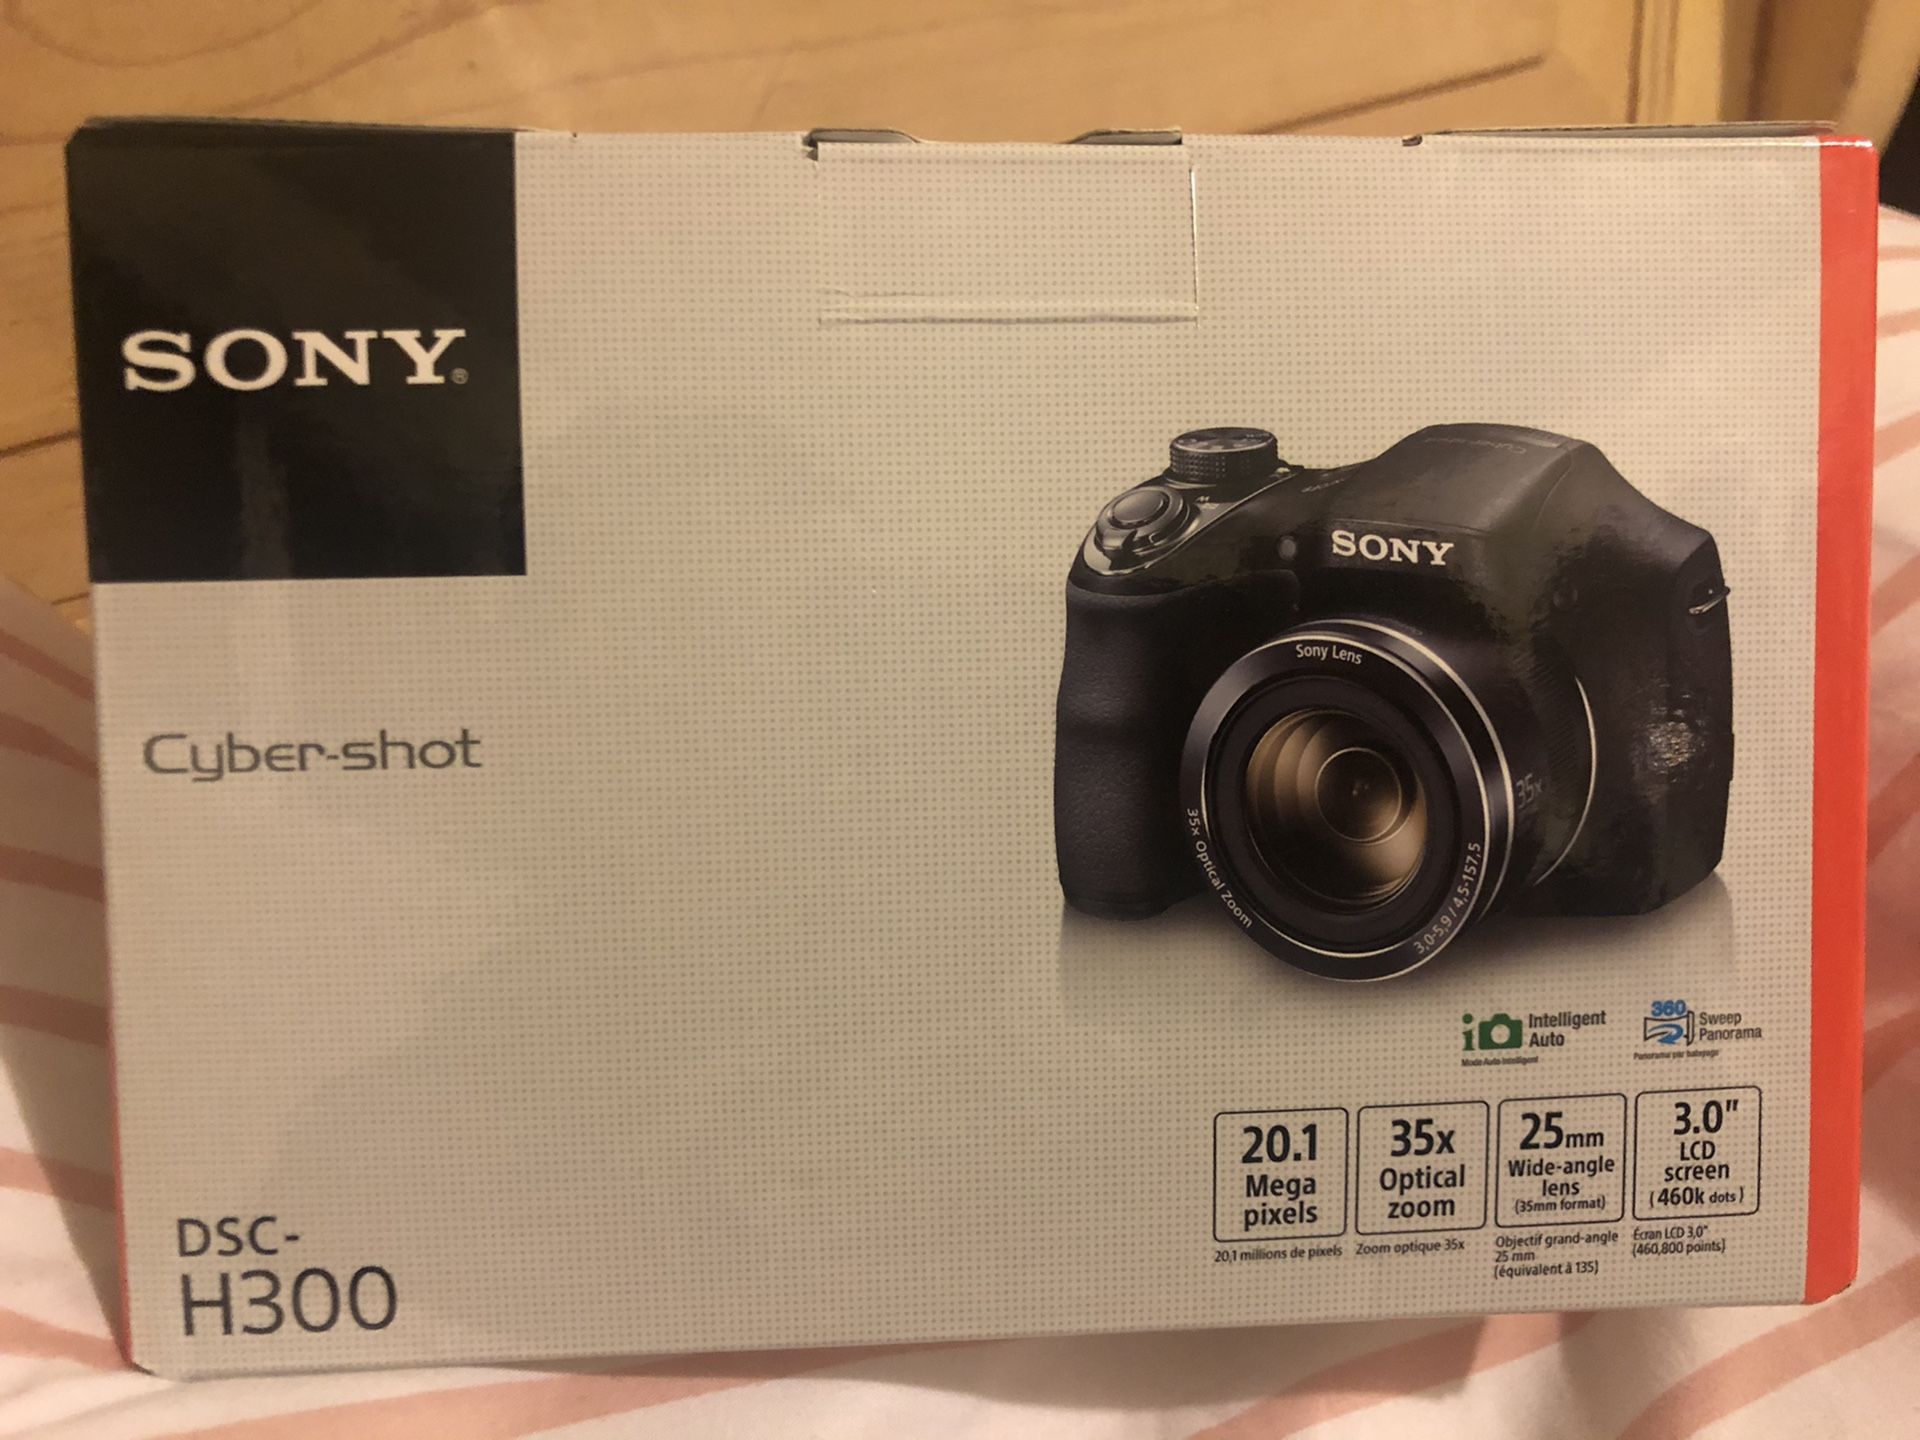 Sony Black DSC-H300/B Digital Camera with 20.1 Megapixels and 35x Optical Zoom